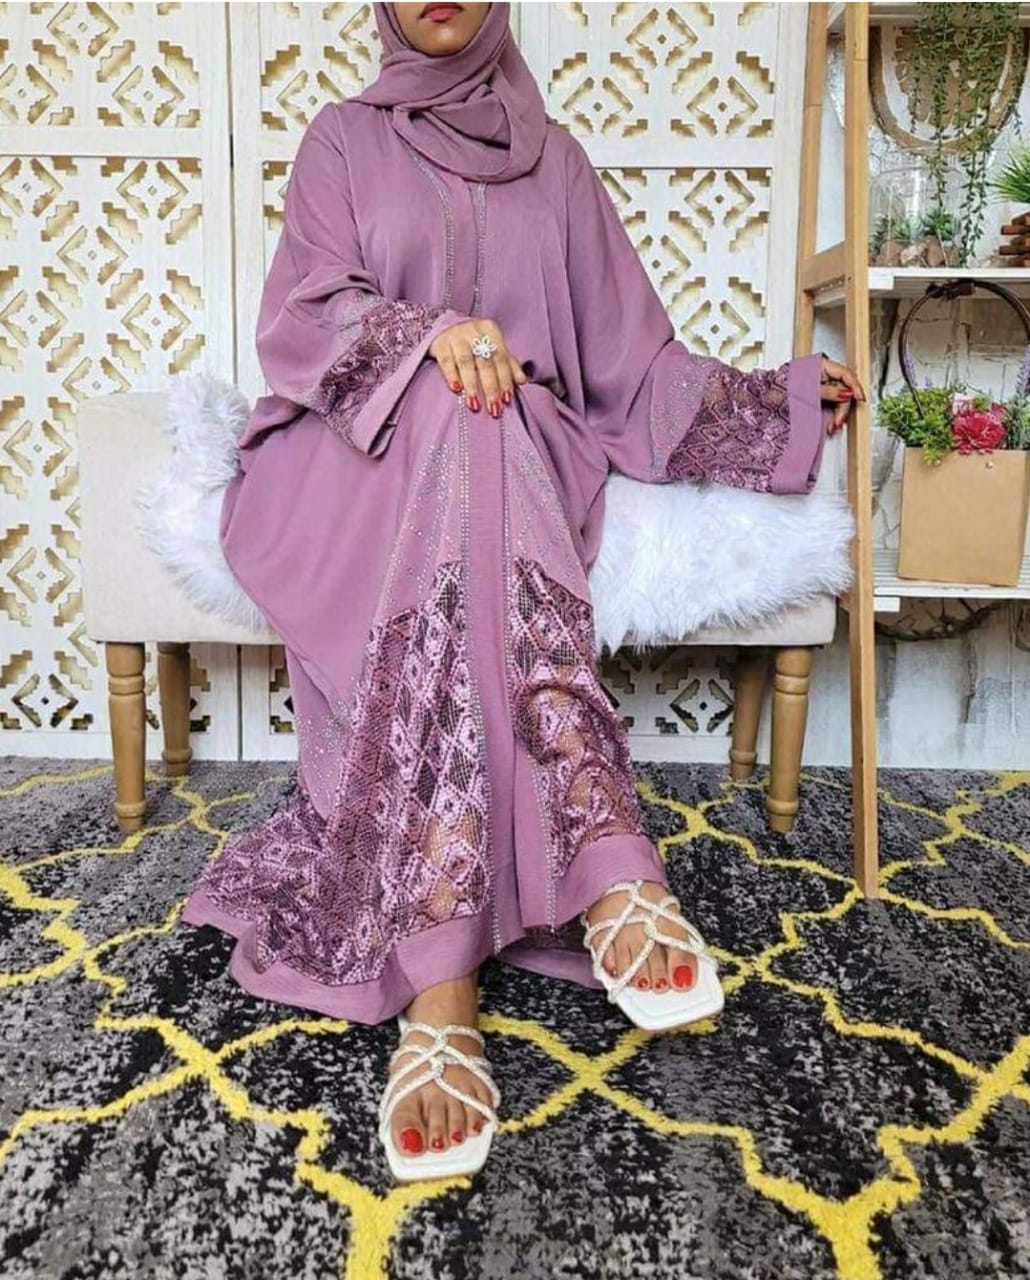 Pink Abaya with Laces in Hand Abaya